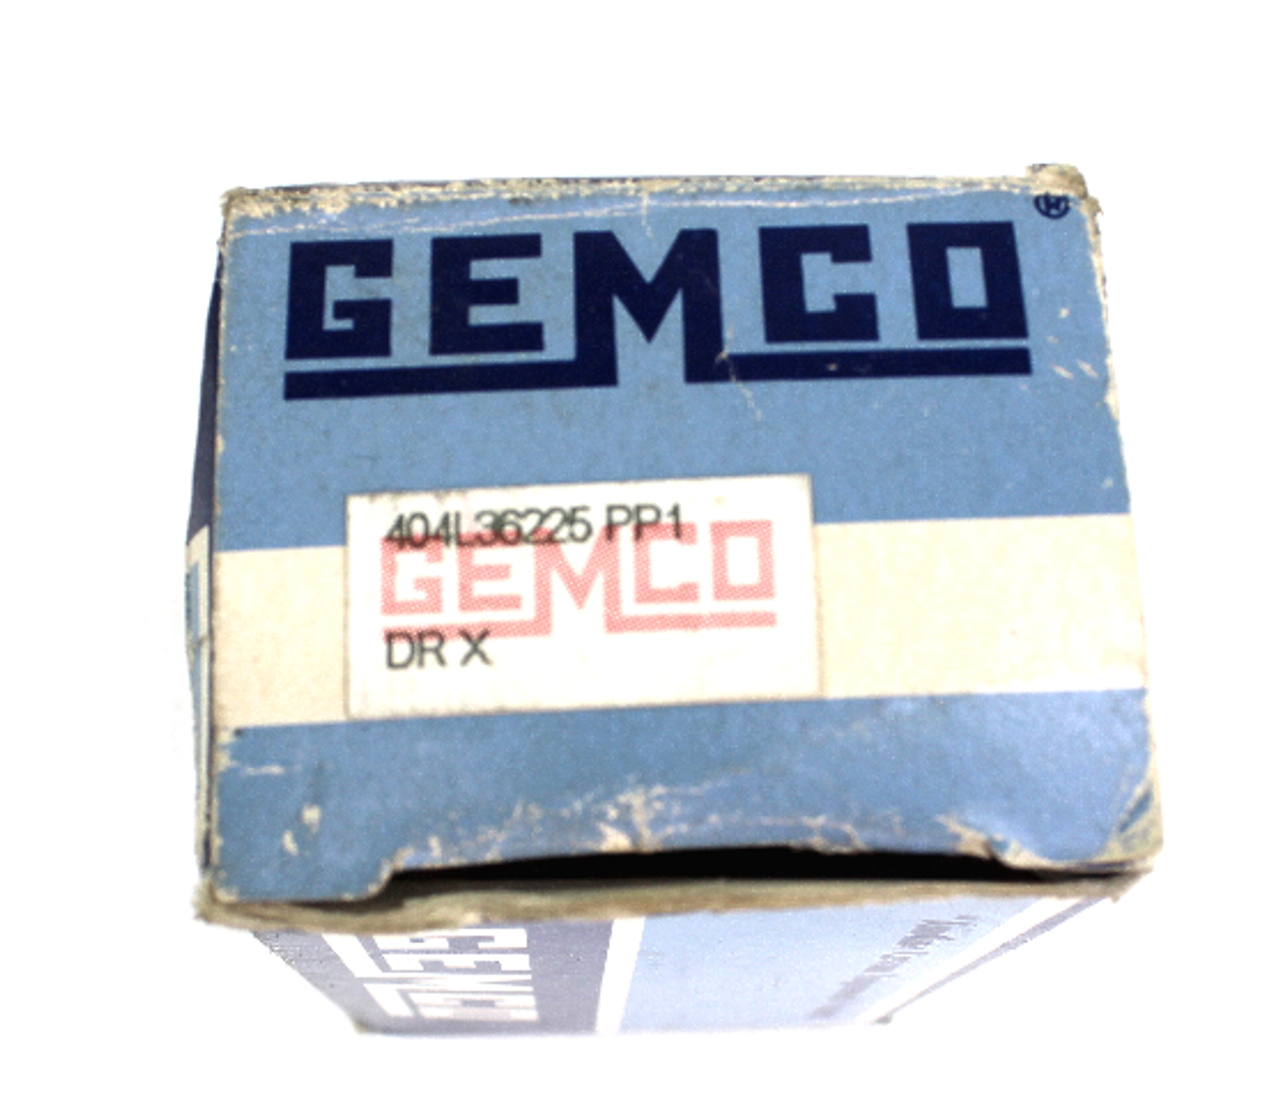 Gemco 404L36225 PP1 Push Button Used